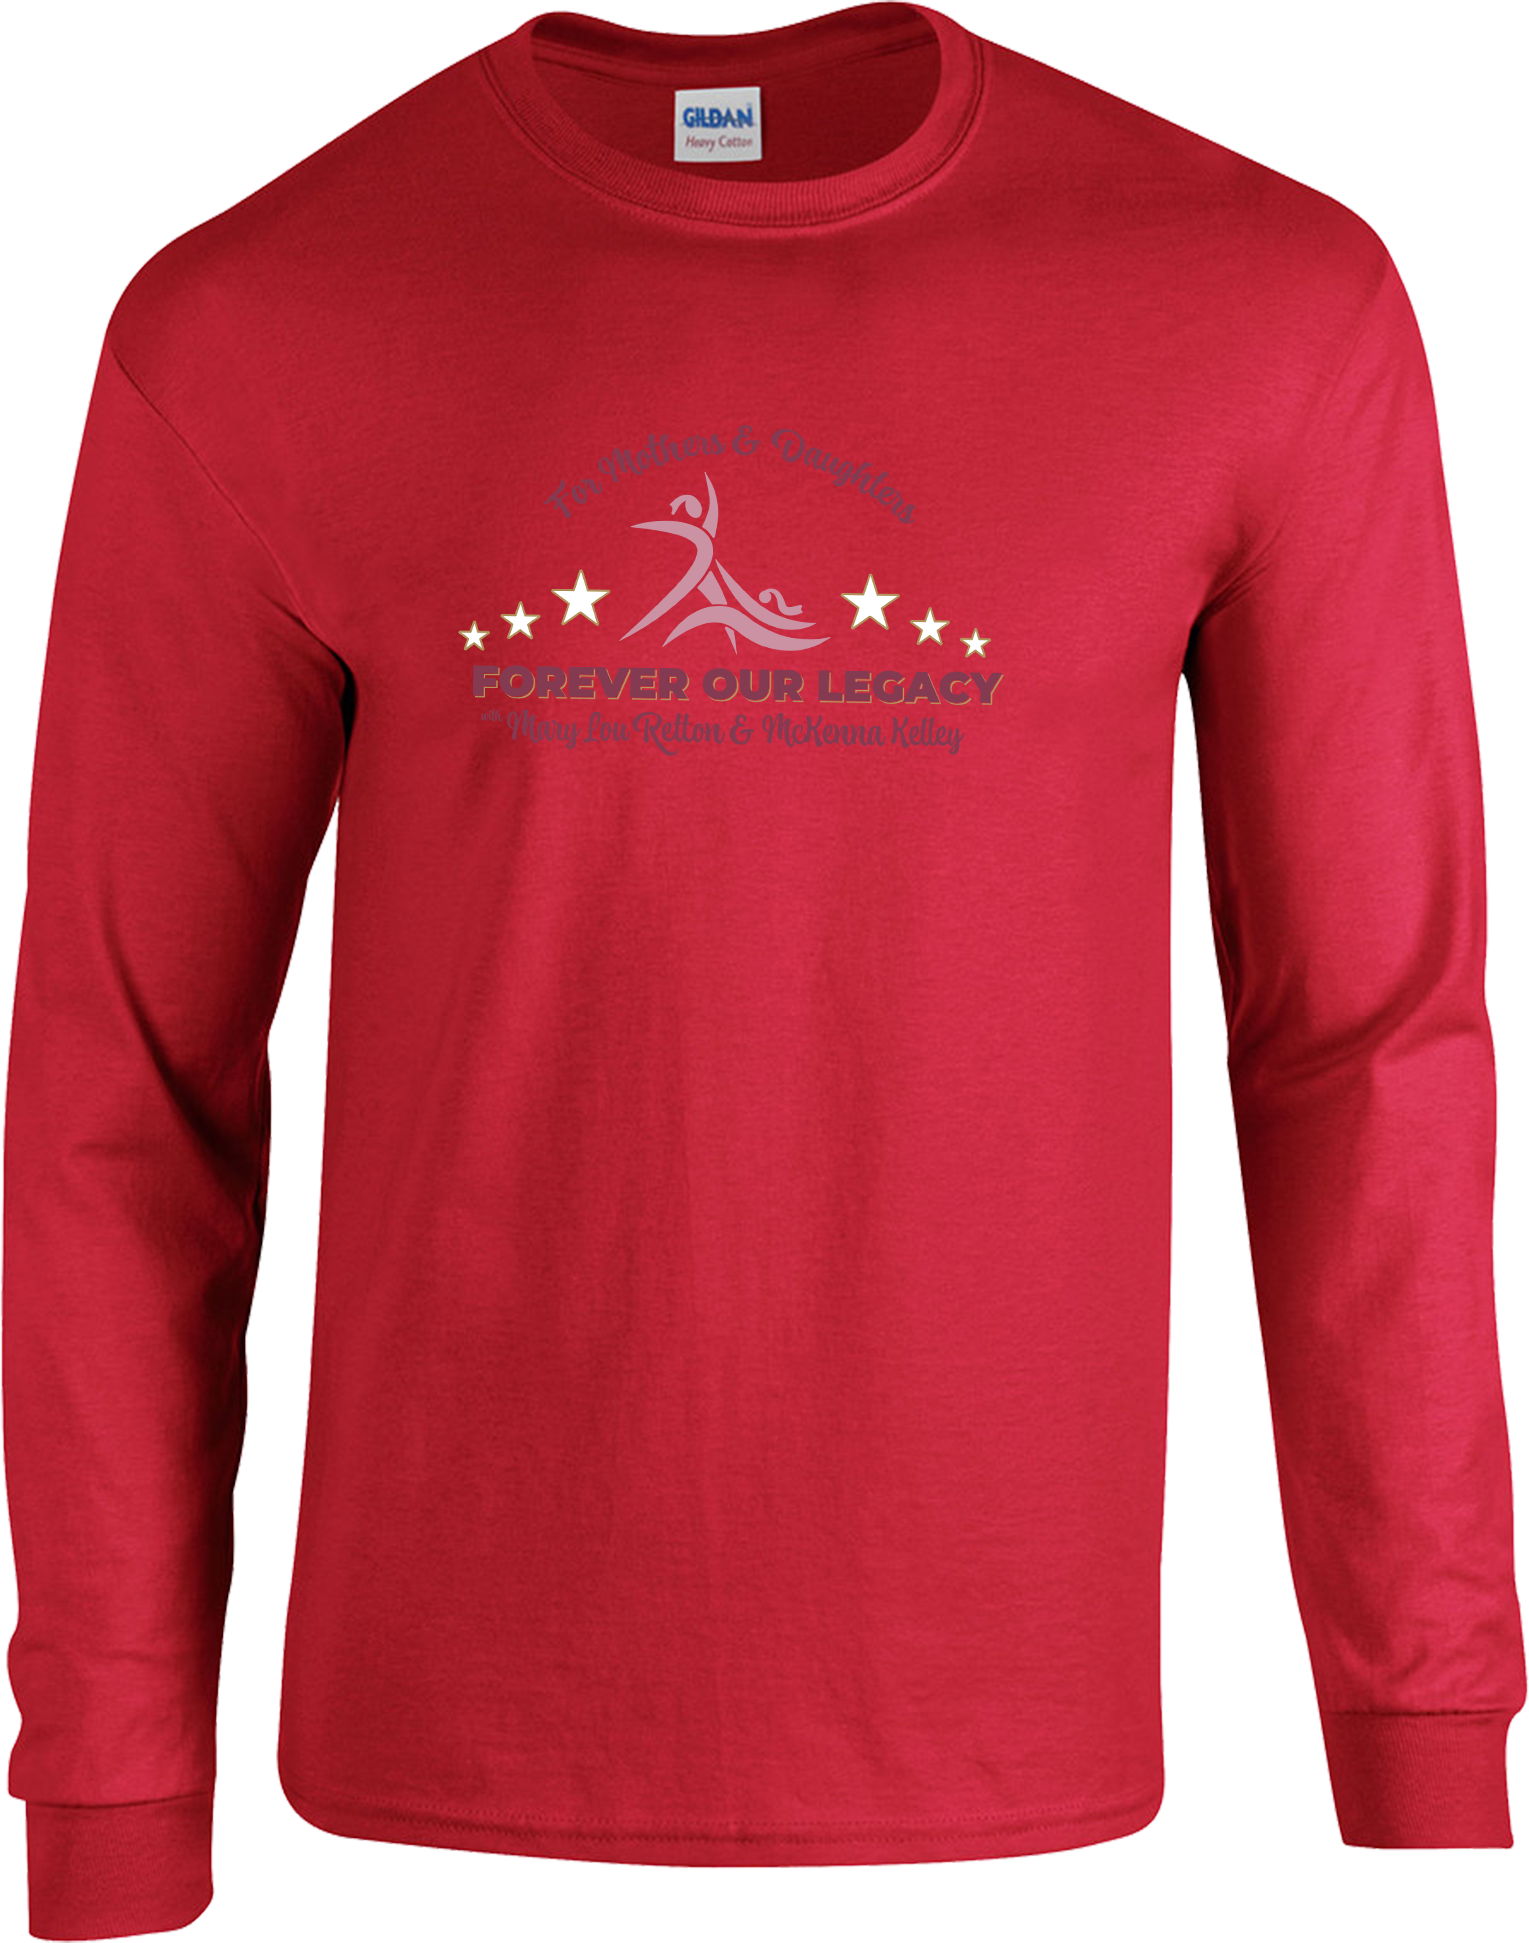 Long Sleeves - 2024 For Mothers & Daughters Forever Our Legacy Mary Lou Retton